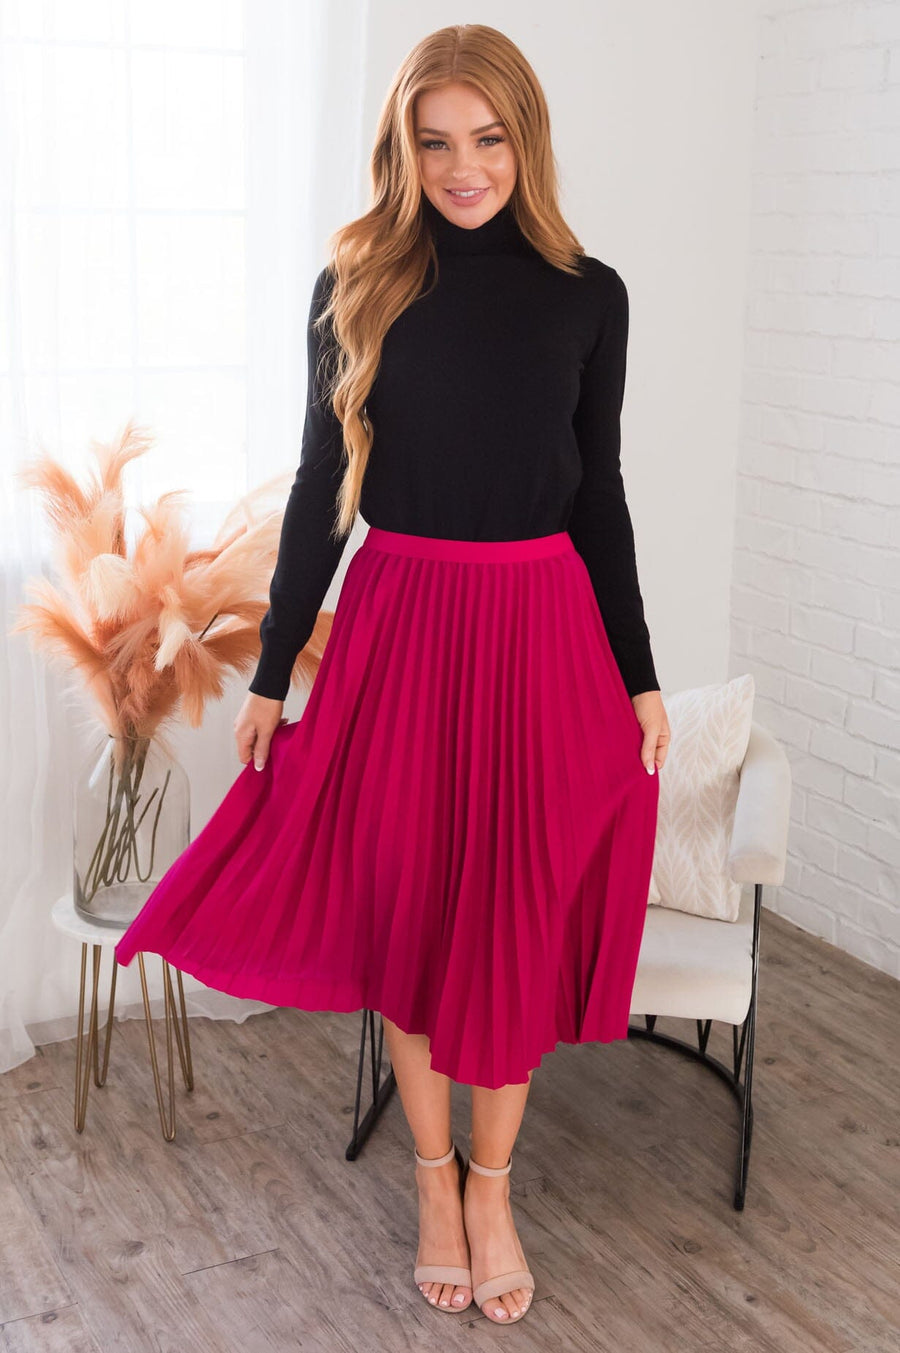 Searching For You Modest Pleat Skirt Skirts vendor-unknown 